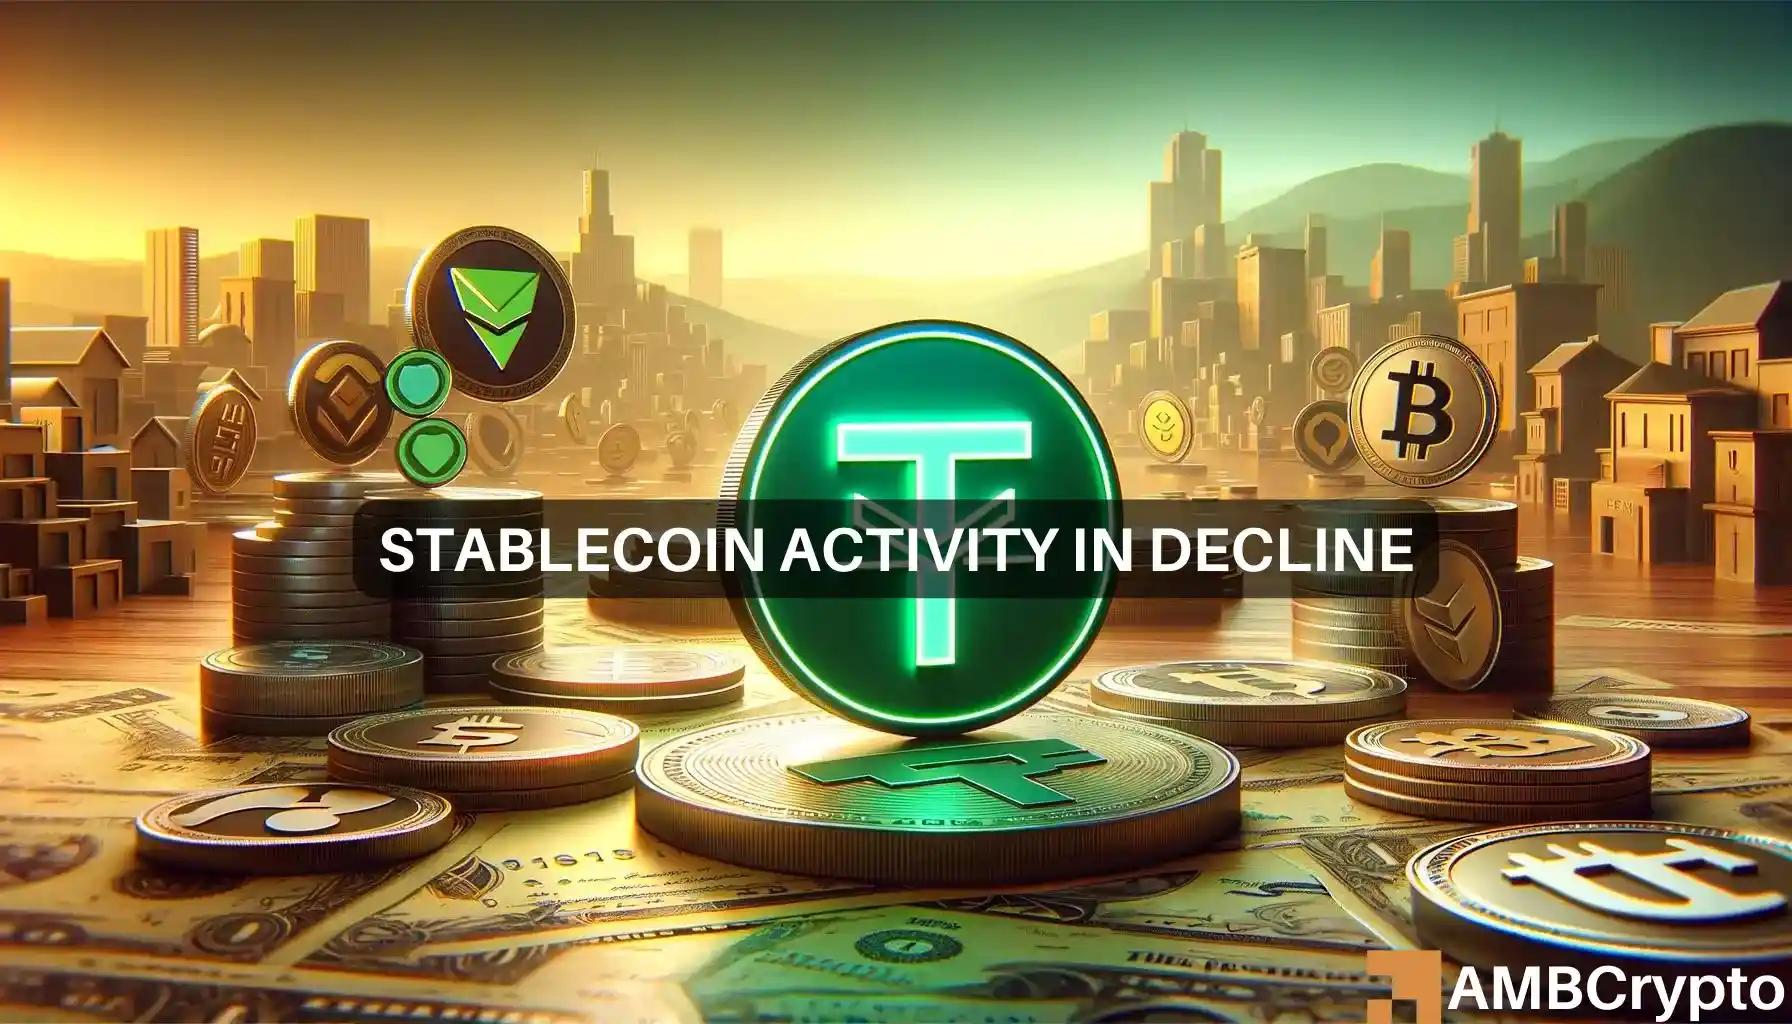 Stablecoins see reduced activity amidst market uncertainty: What now?